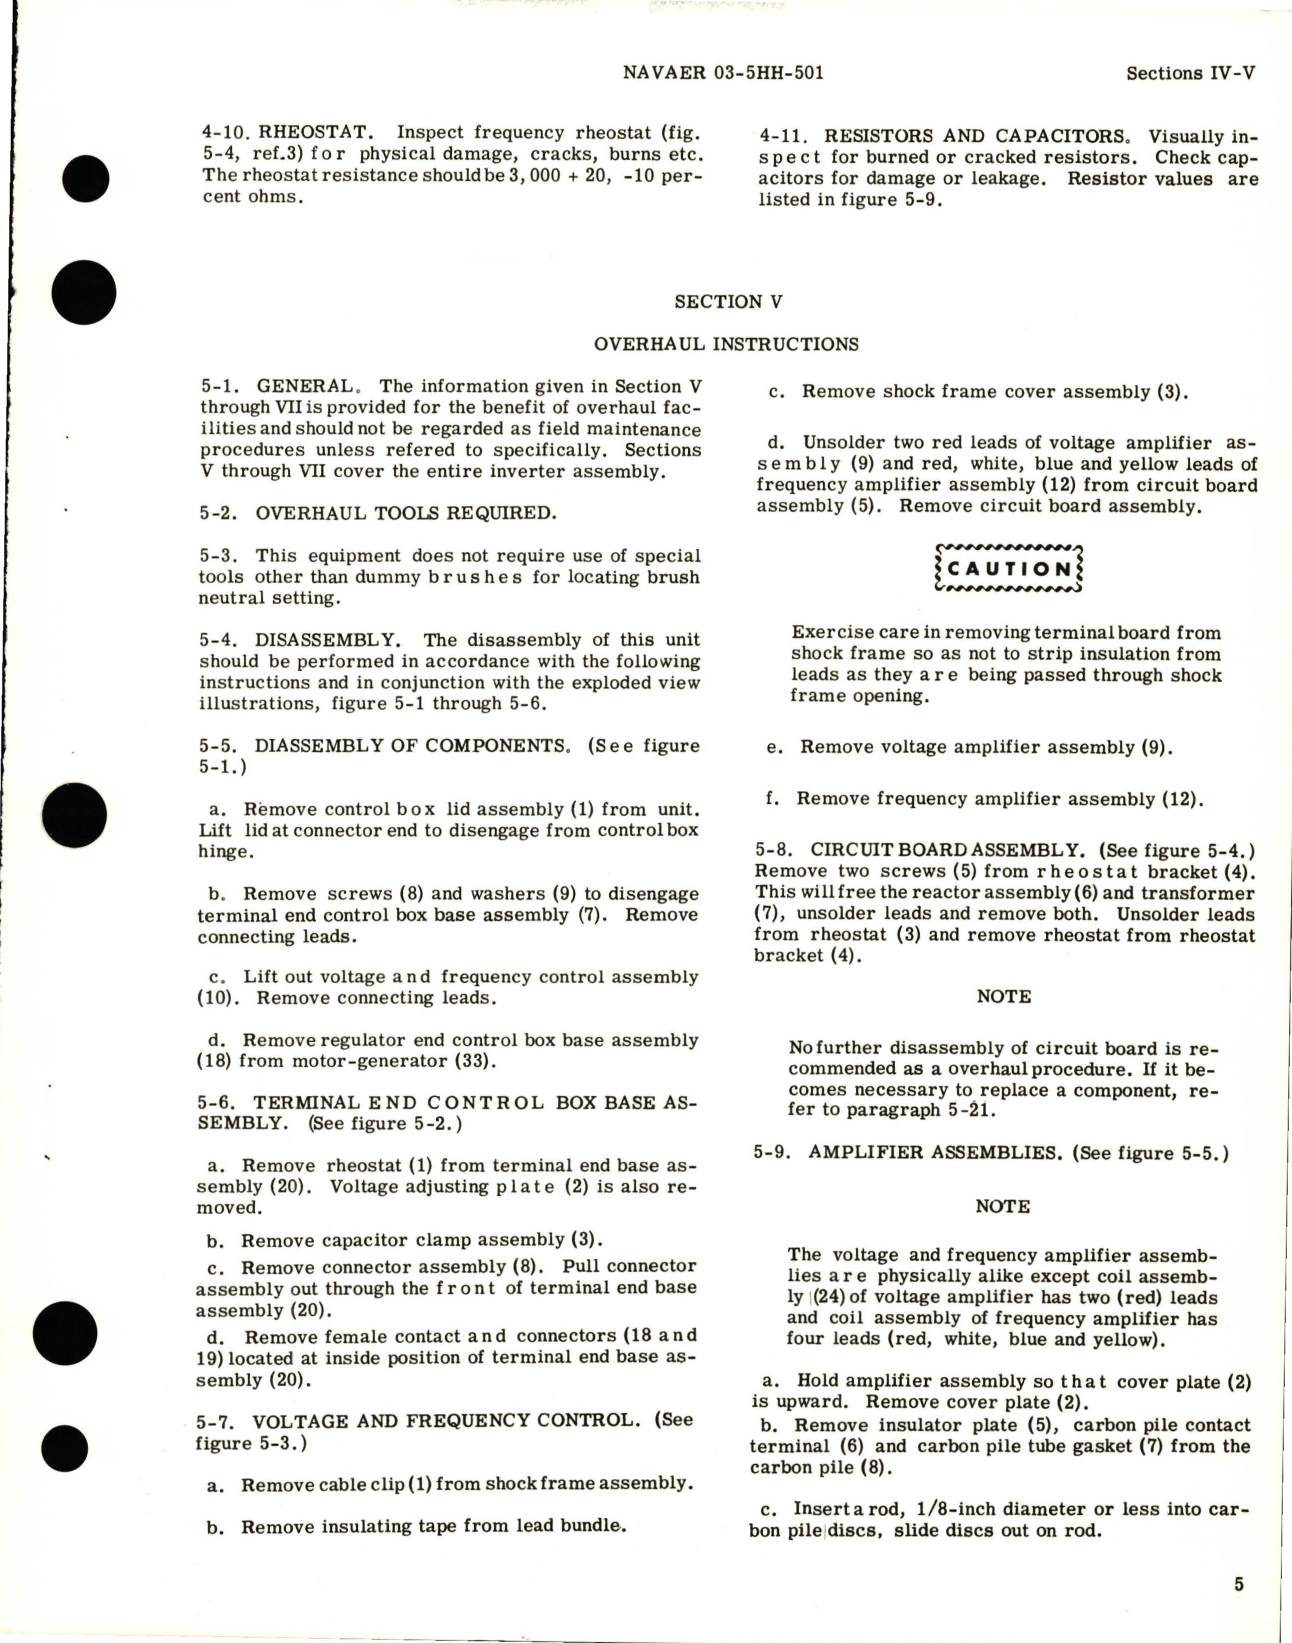 Sample page 9 from AirCorps Library document: Overhaul Instructions for Inverter - Part SE-16-2 and SE-16-3